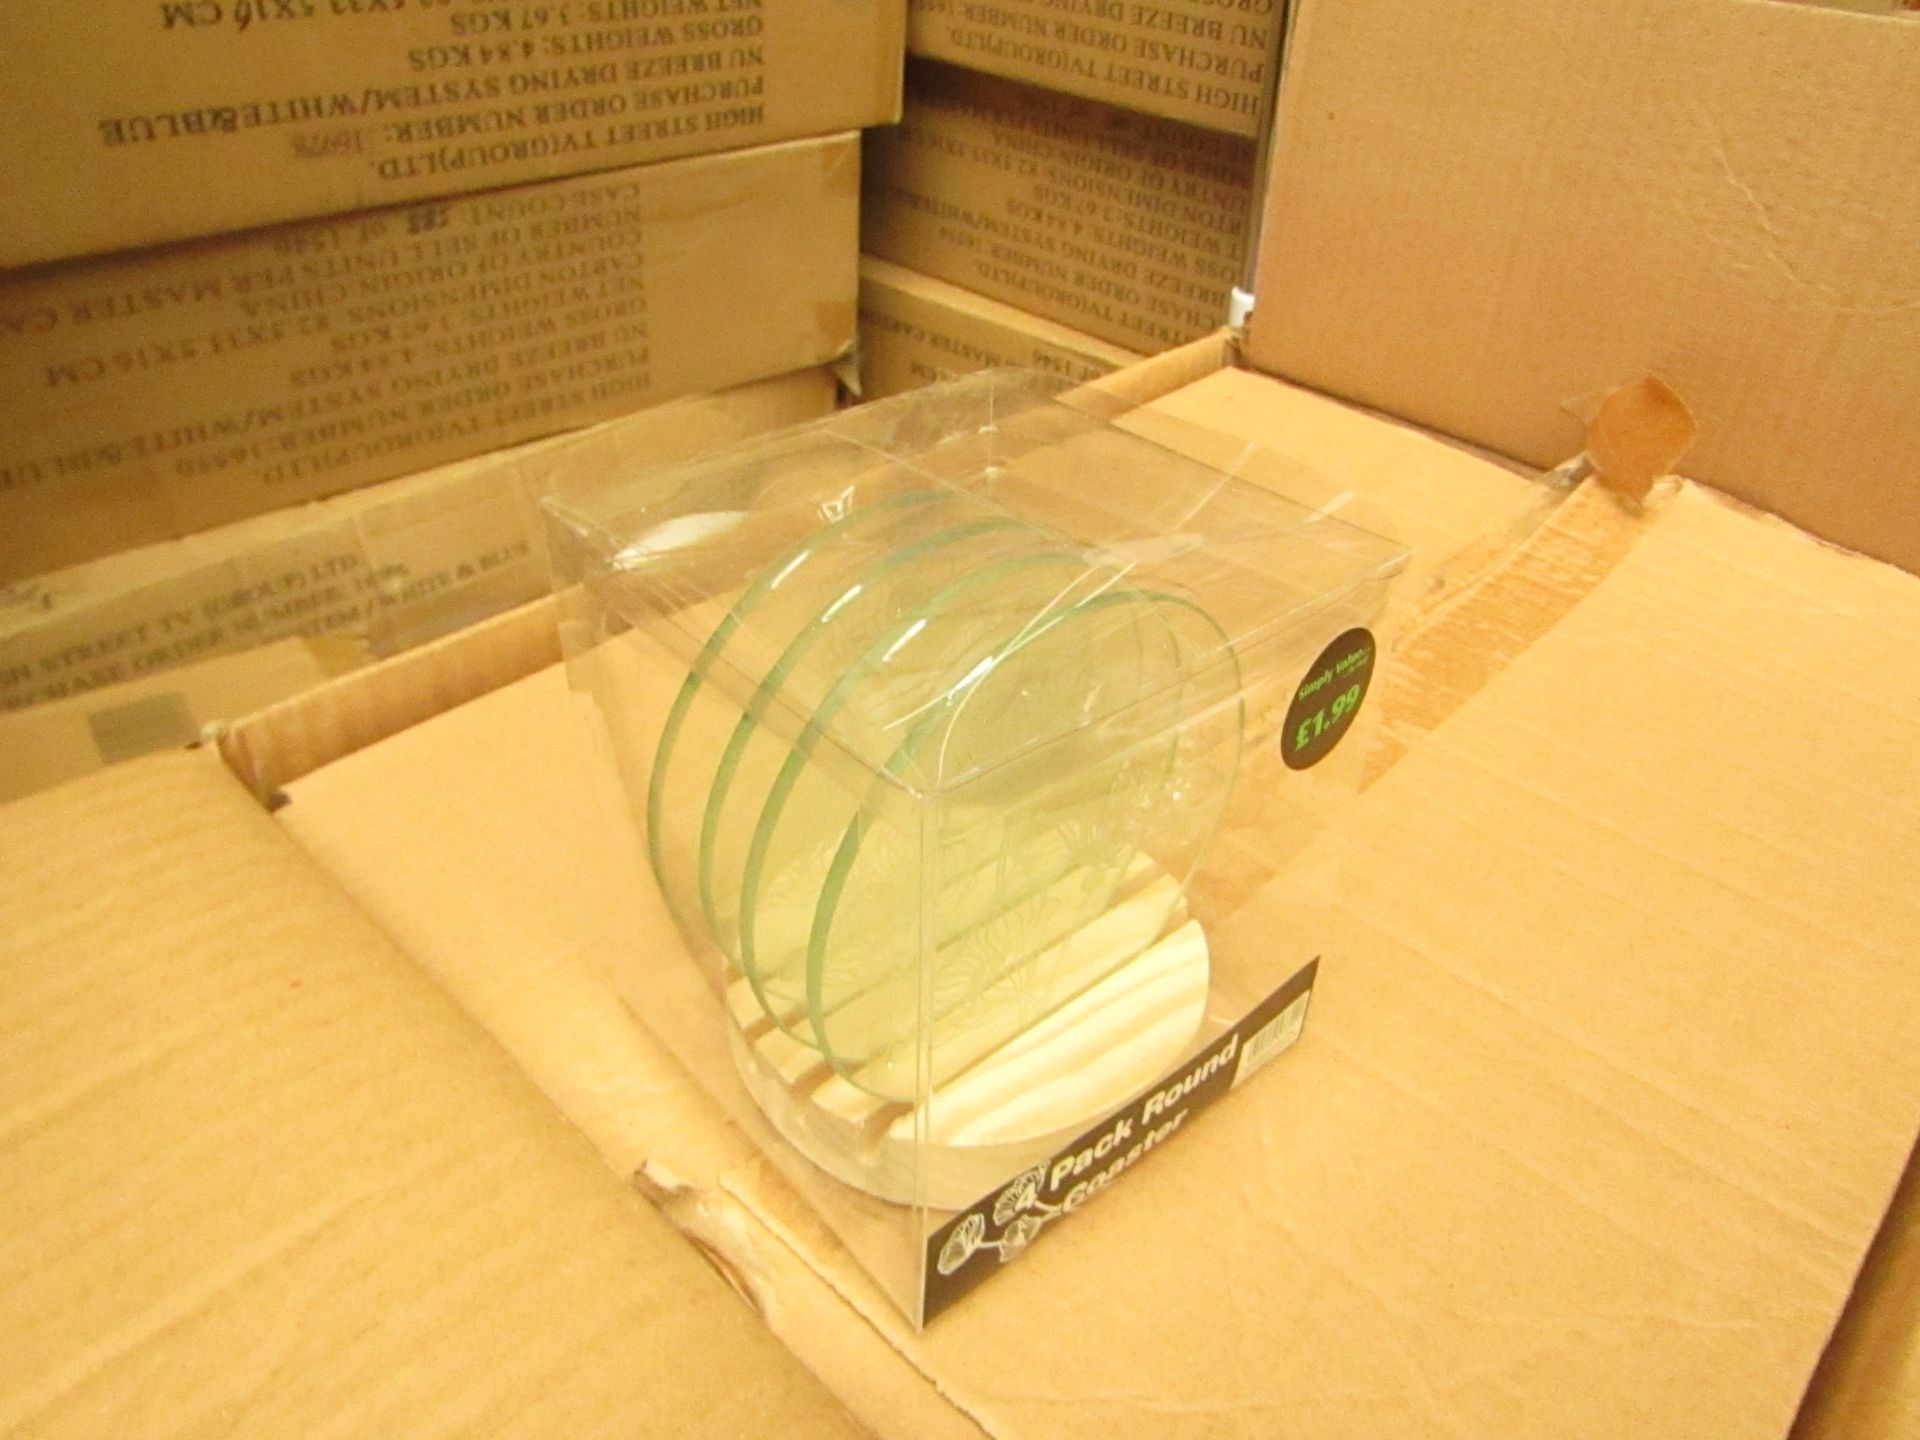 6x Packs of 4 glass round coasters, new and packaged.